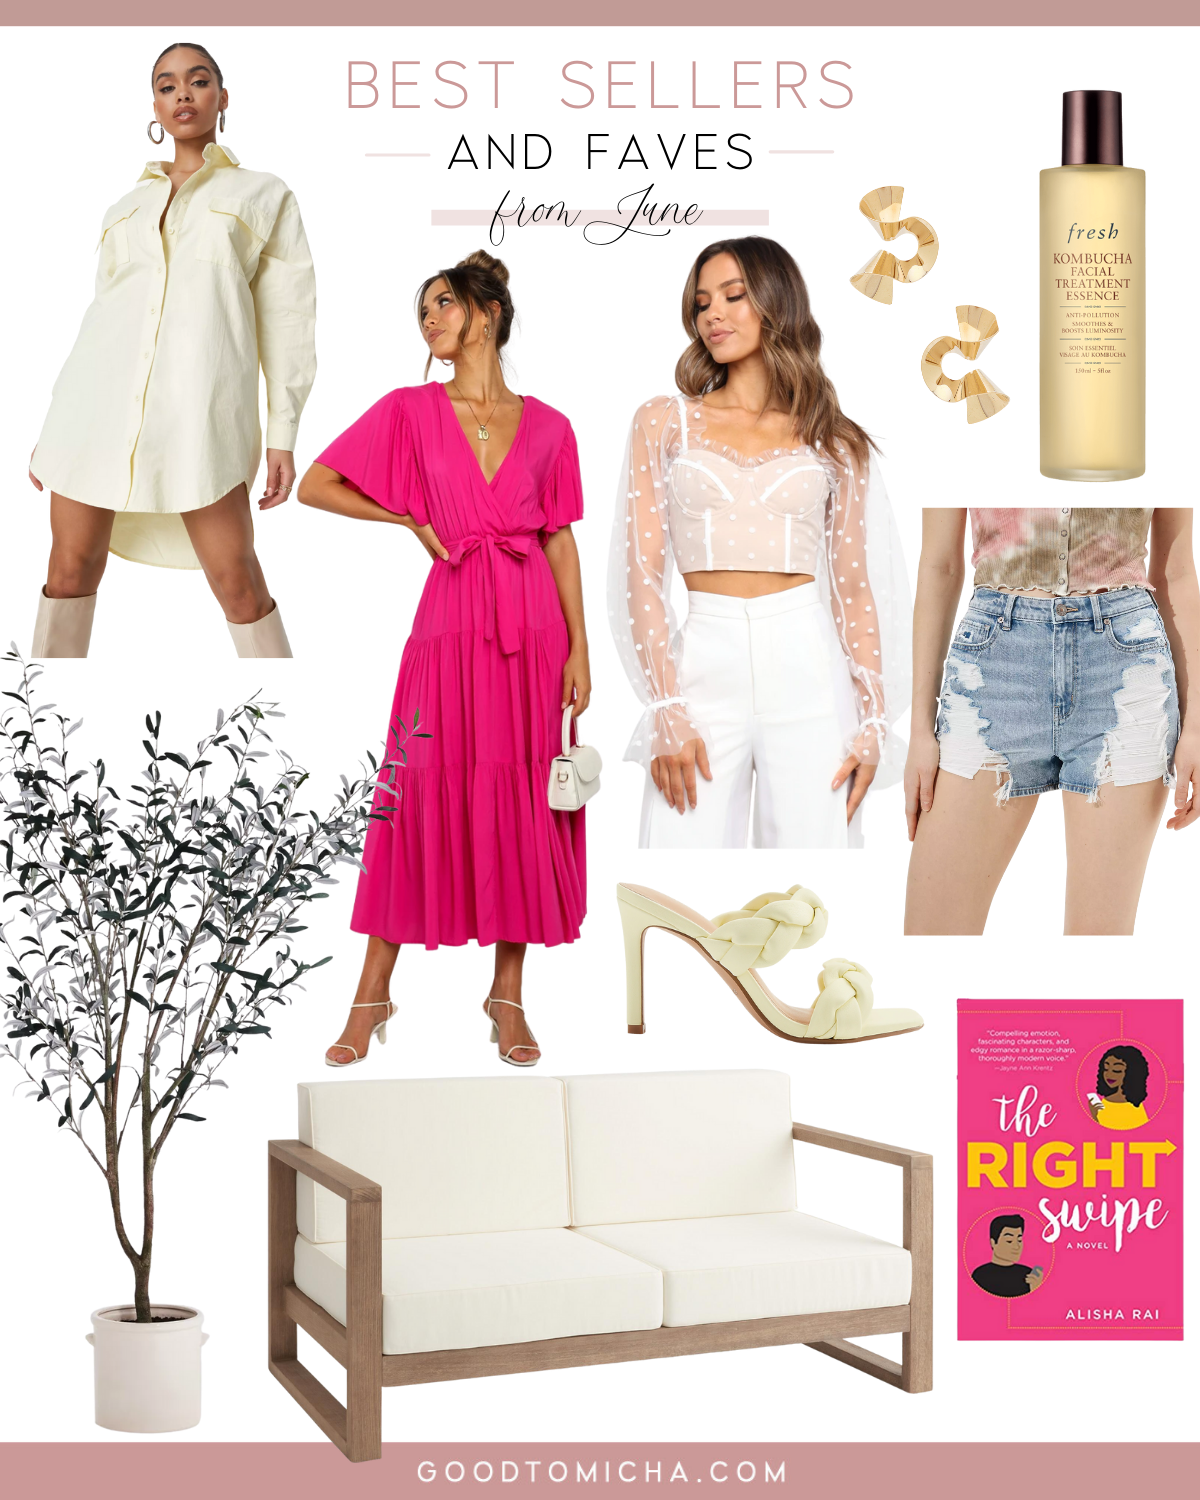 The top selling items from followers for GoodTomicha for the month of June | patio furniture, summer style, denim shorts, rom com novel, skincare products, and home decor